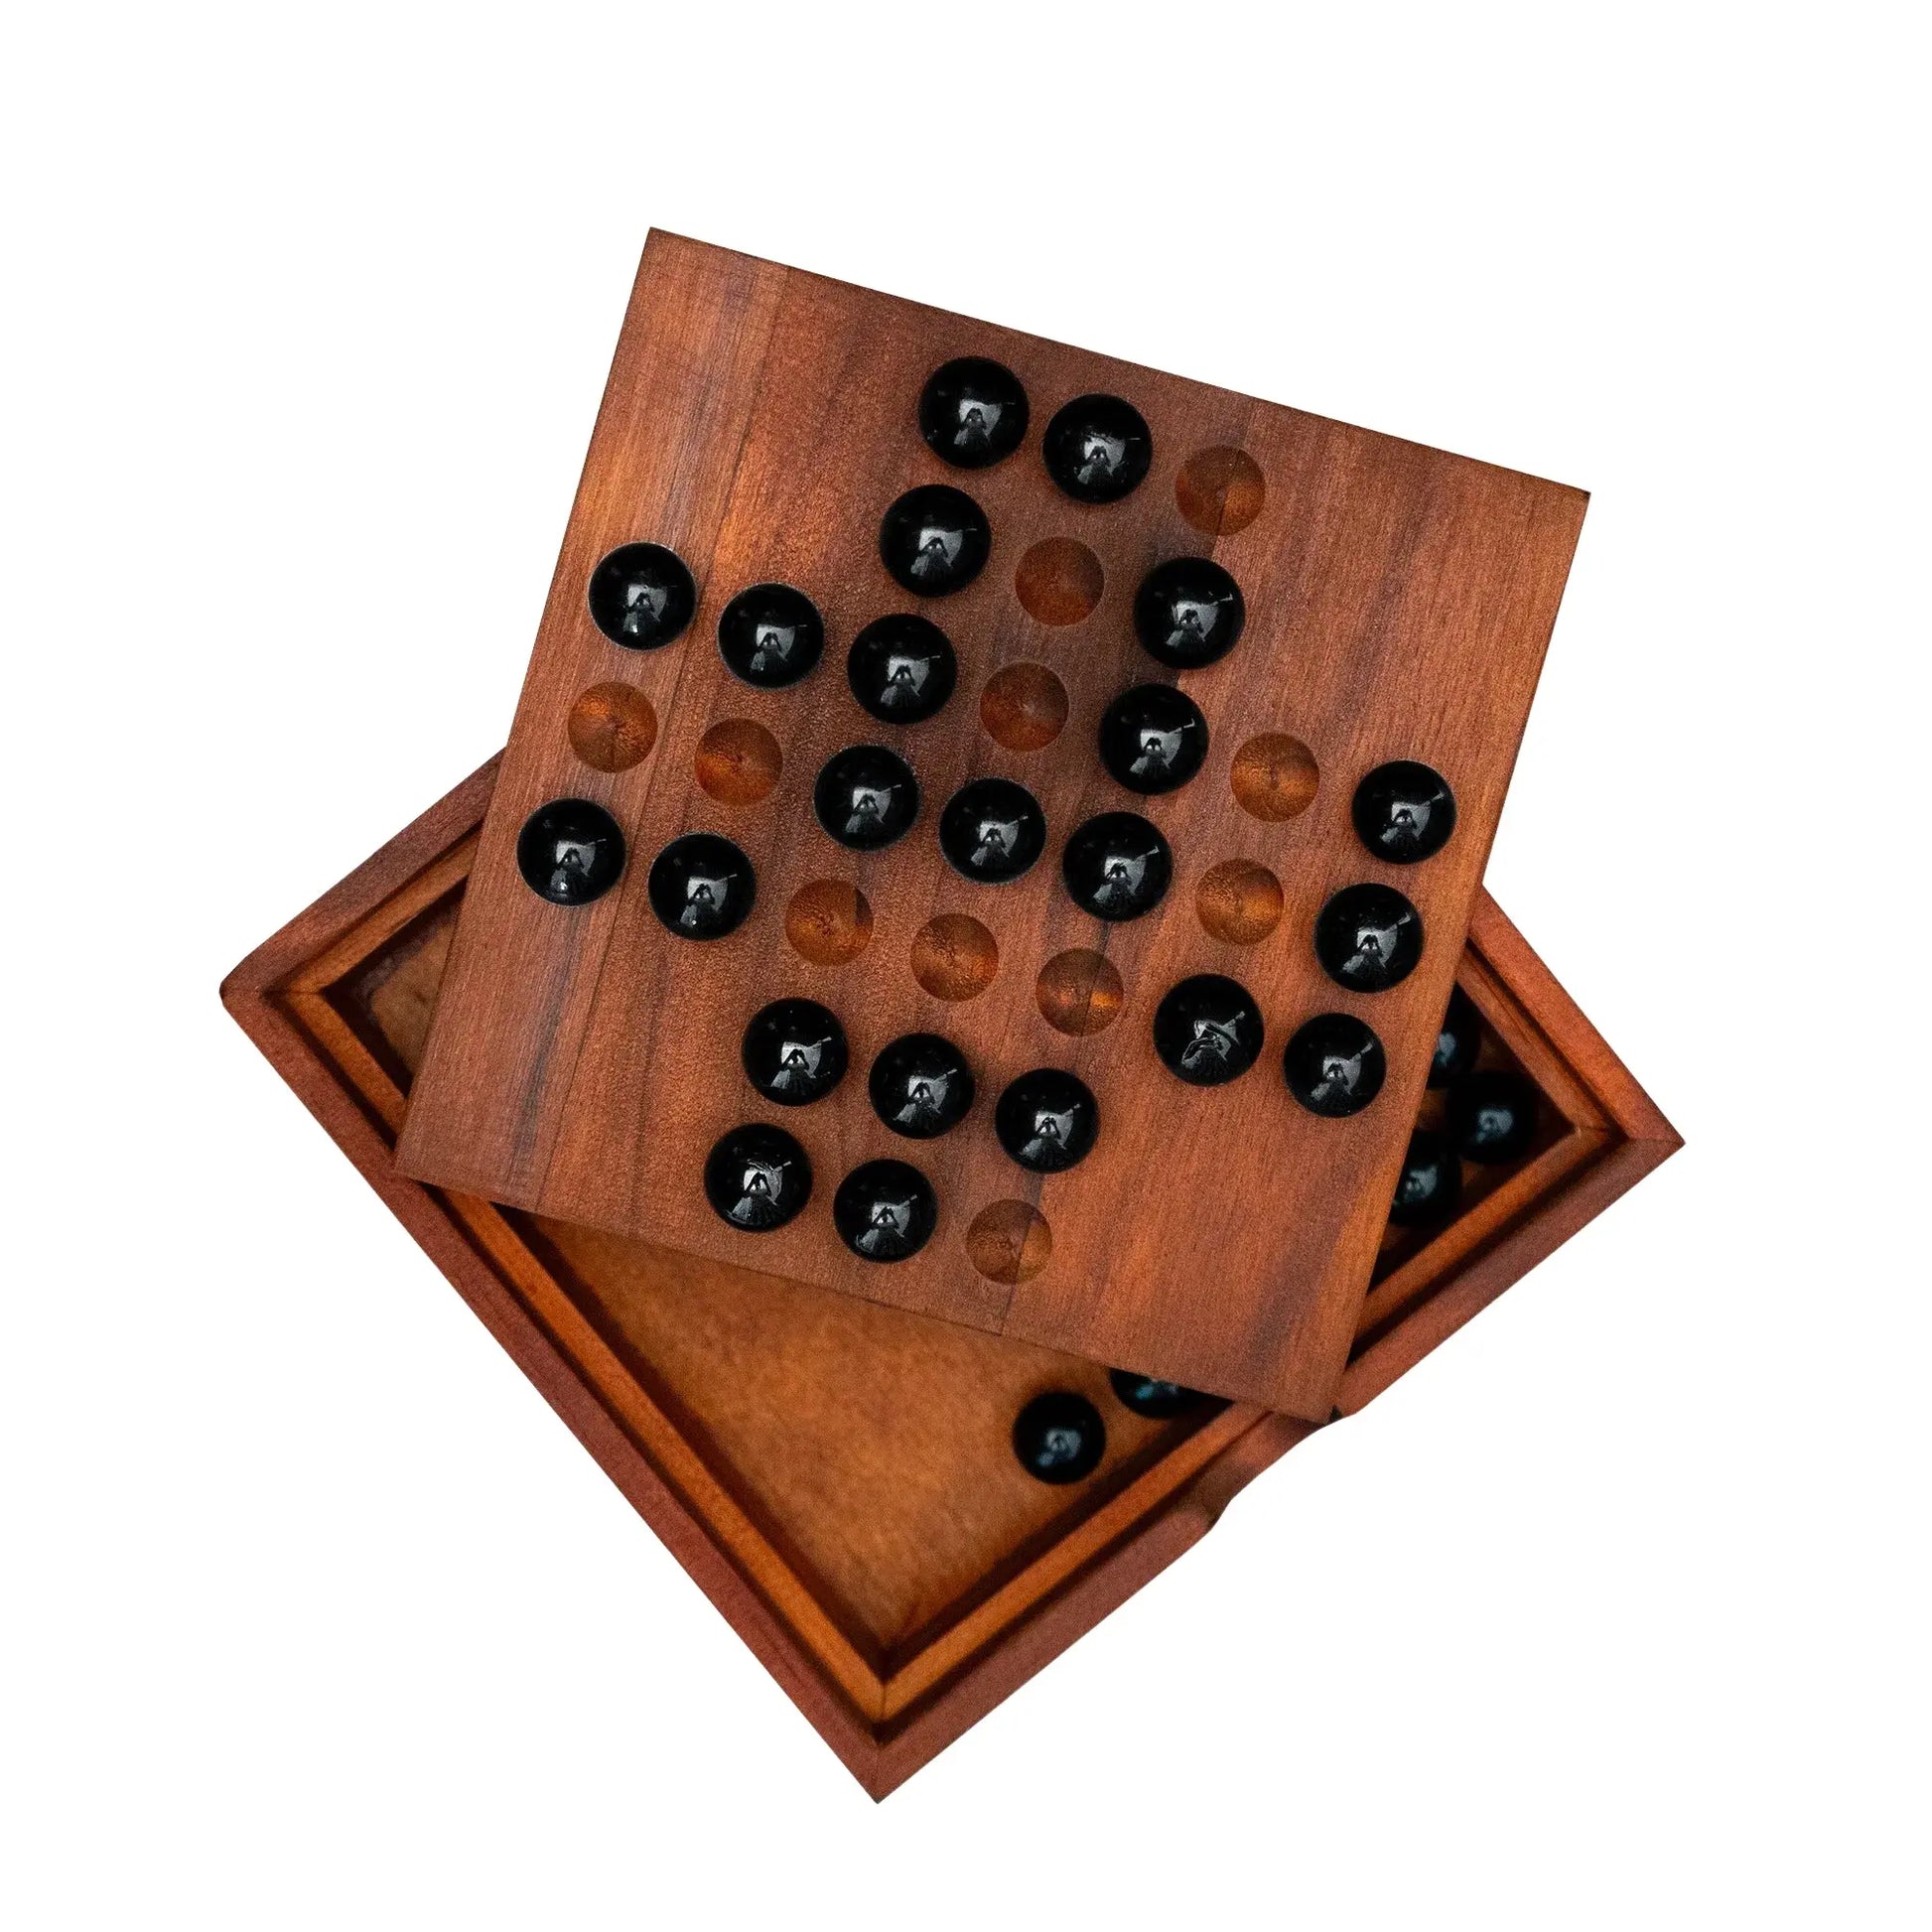 Buy Iron & Glory Solitaire - Deluxe Game Board | Gamess at Woven Durham